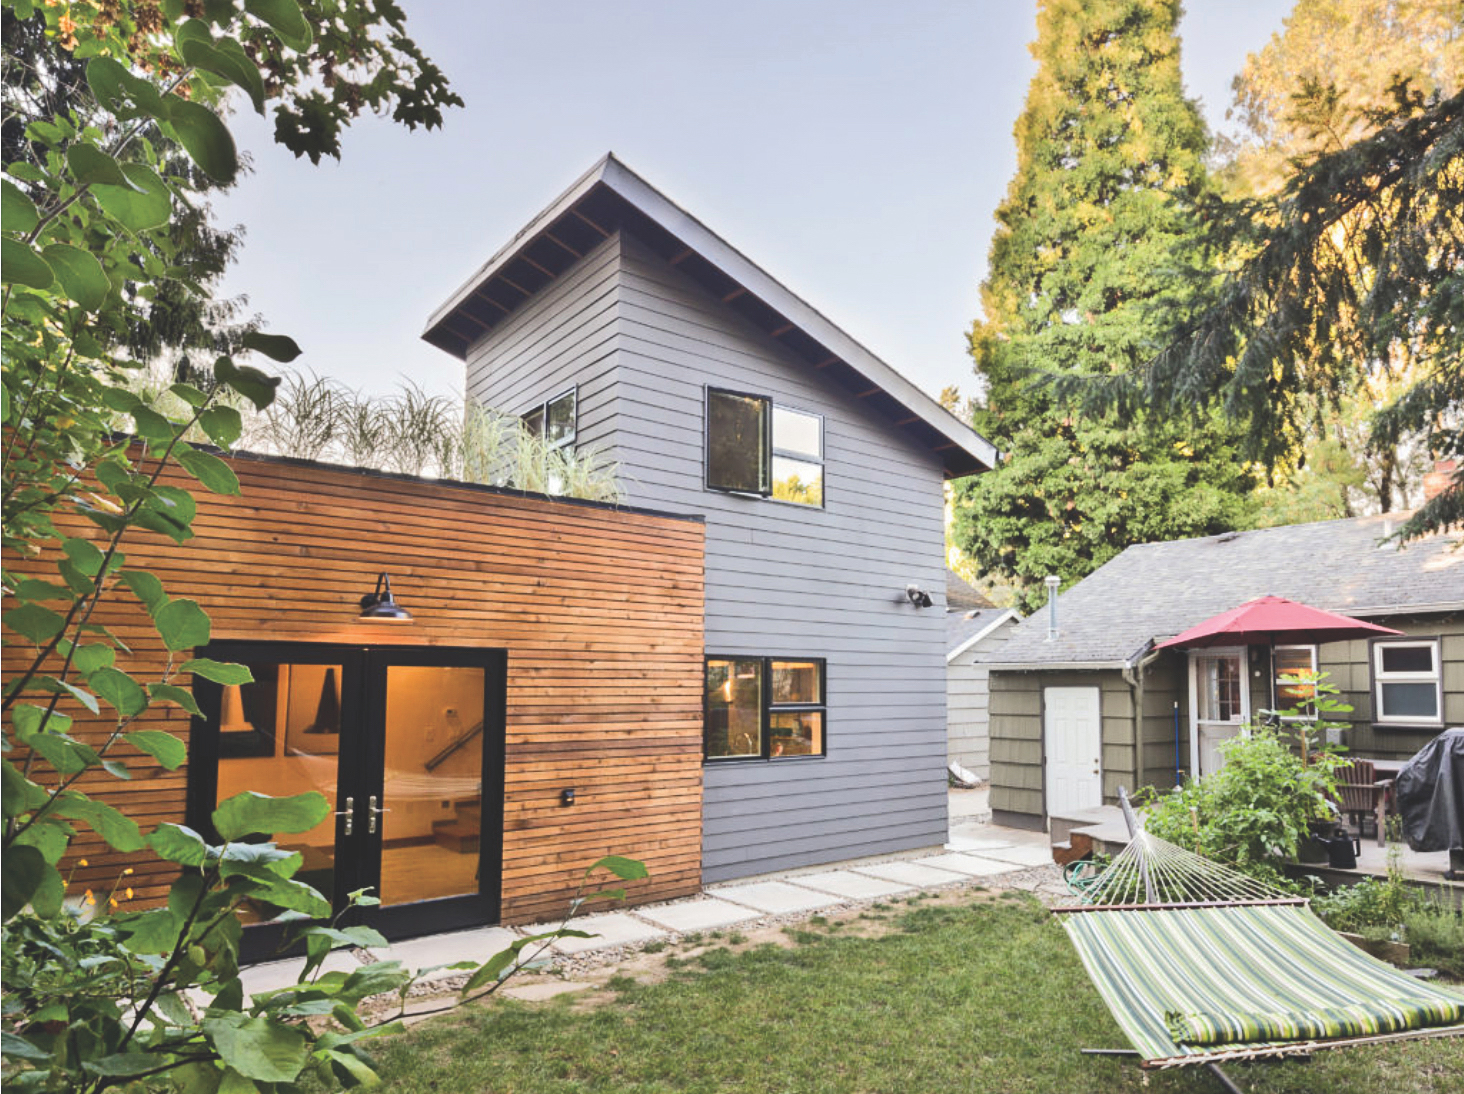 Sleekly designed two-story accessory dwelling unit behind a house